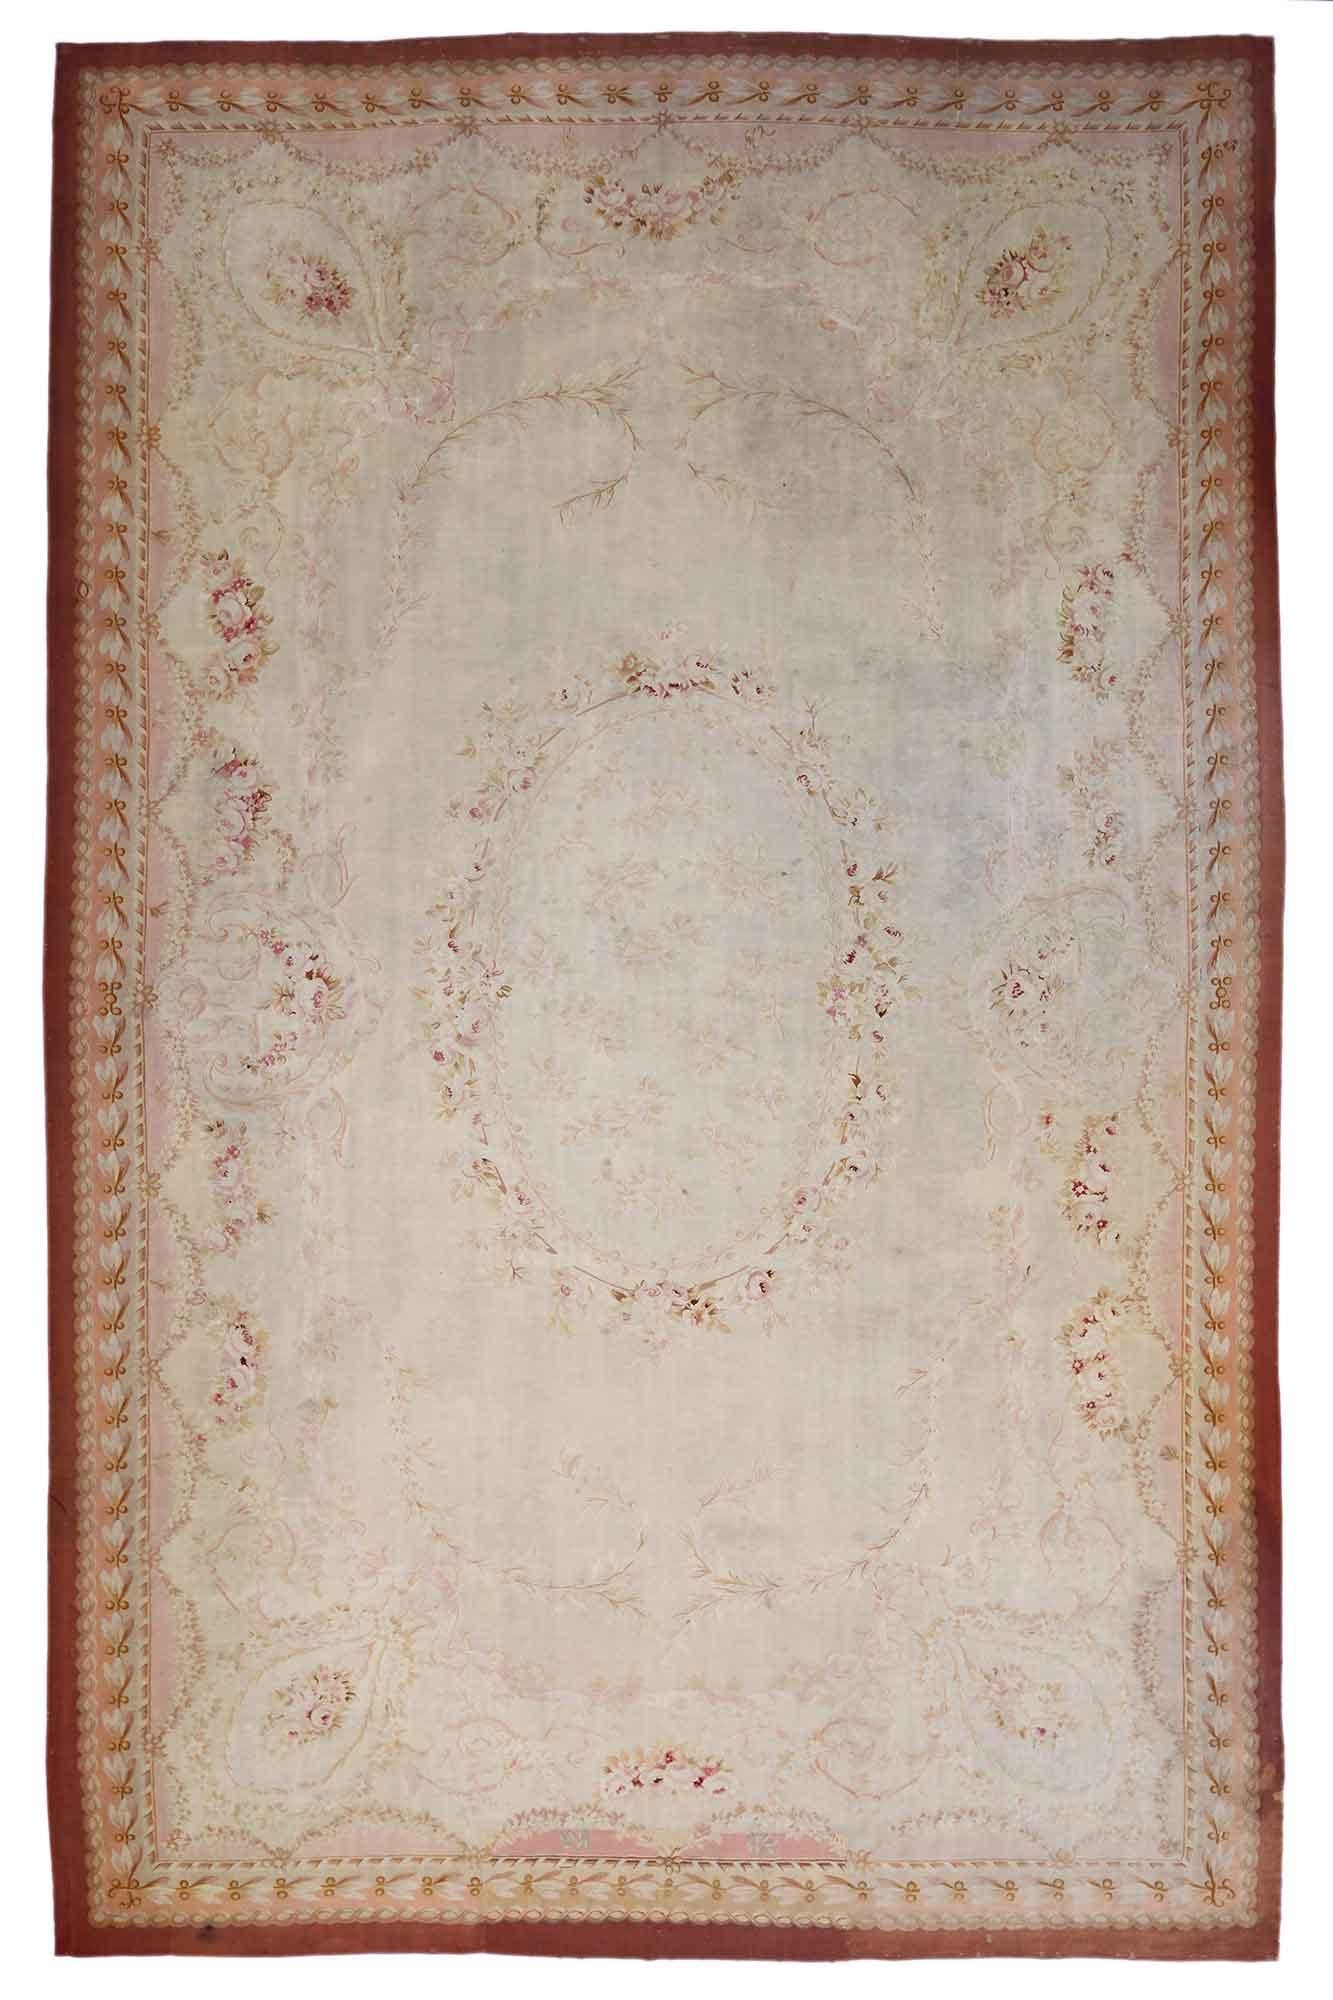 Late 19th Century Antique French Aubusson Rug with Romantic Rococo Style For Sale 3